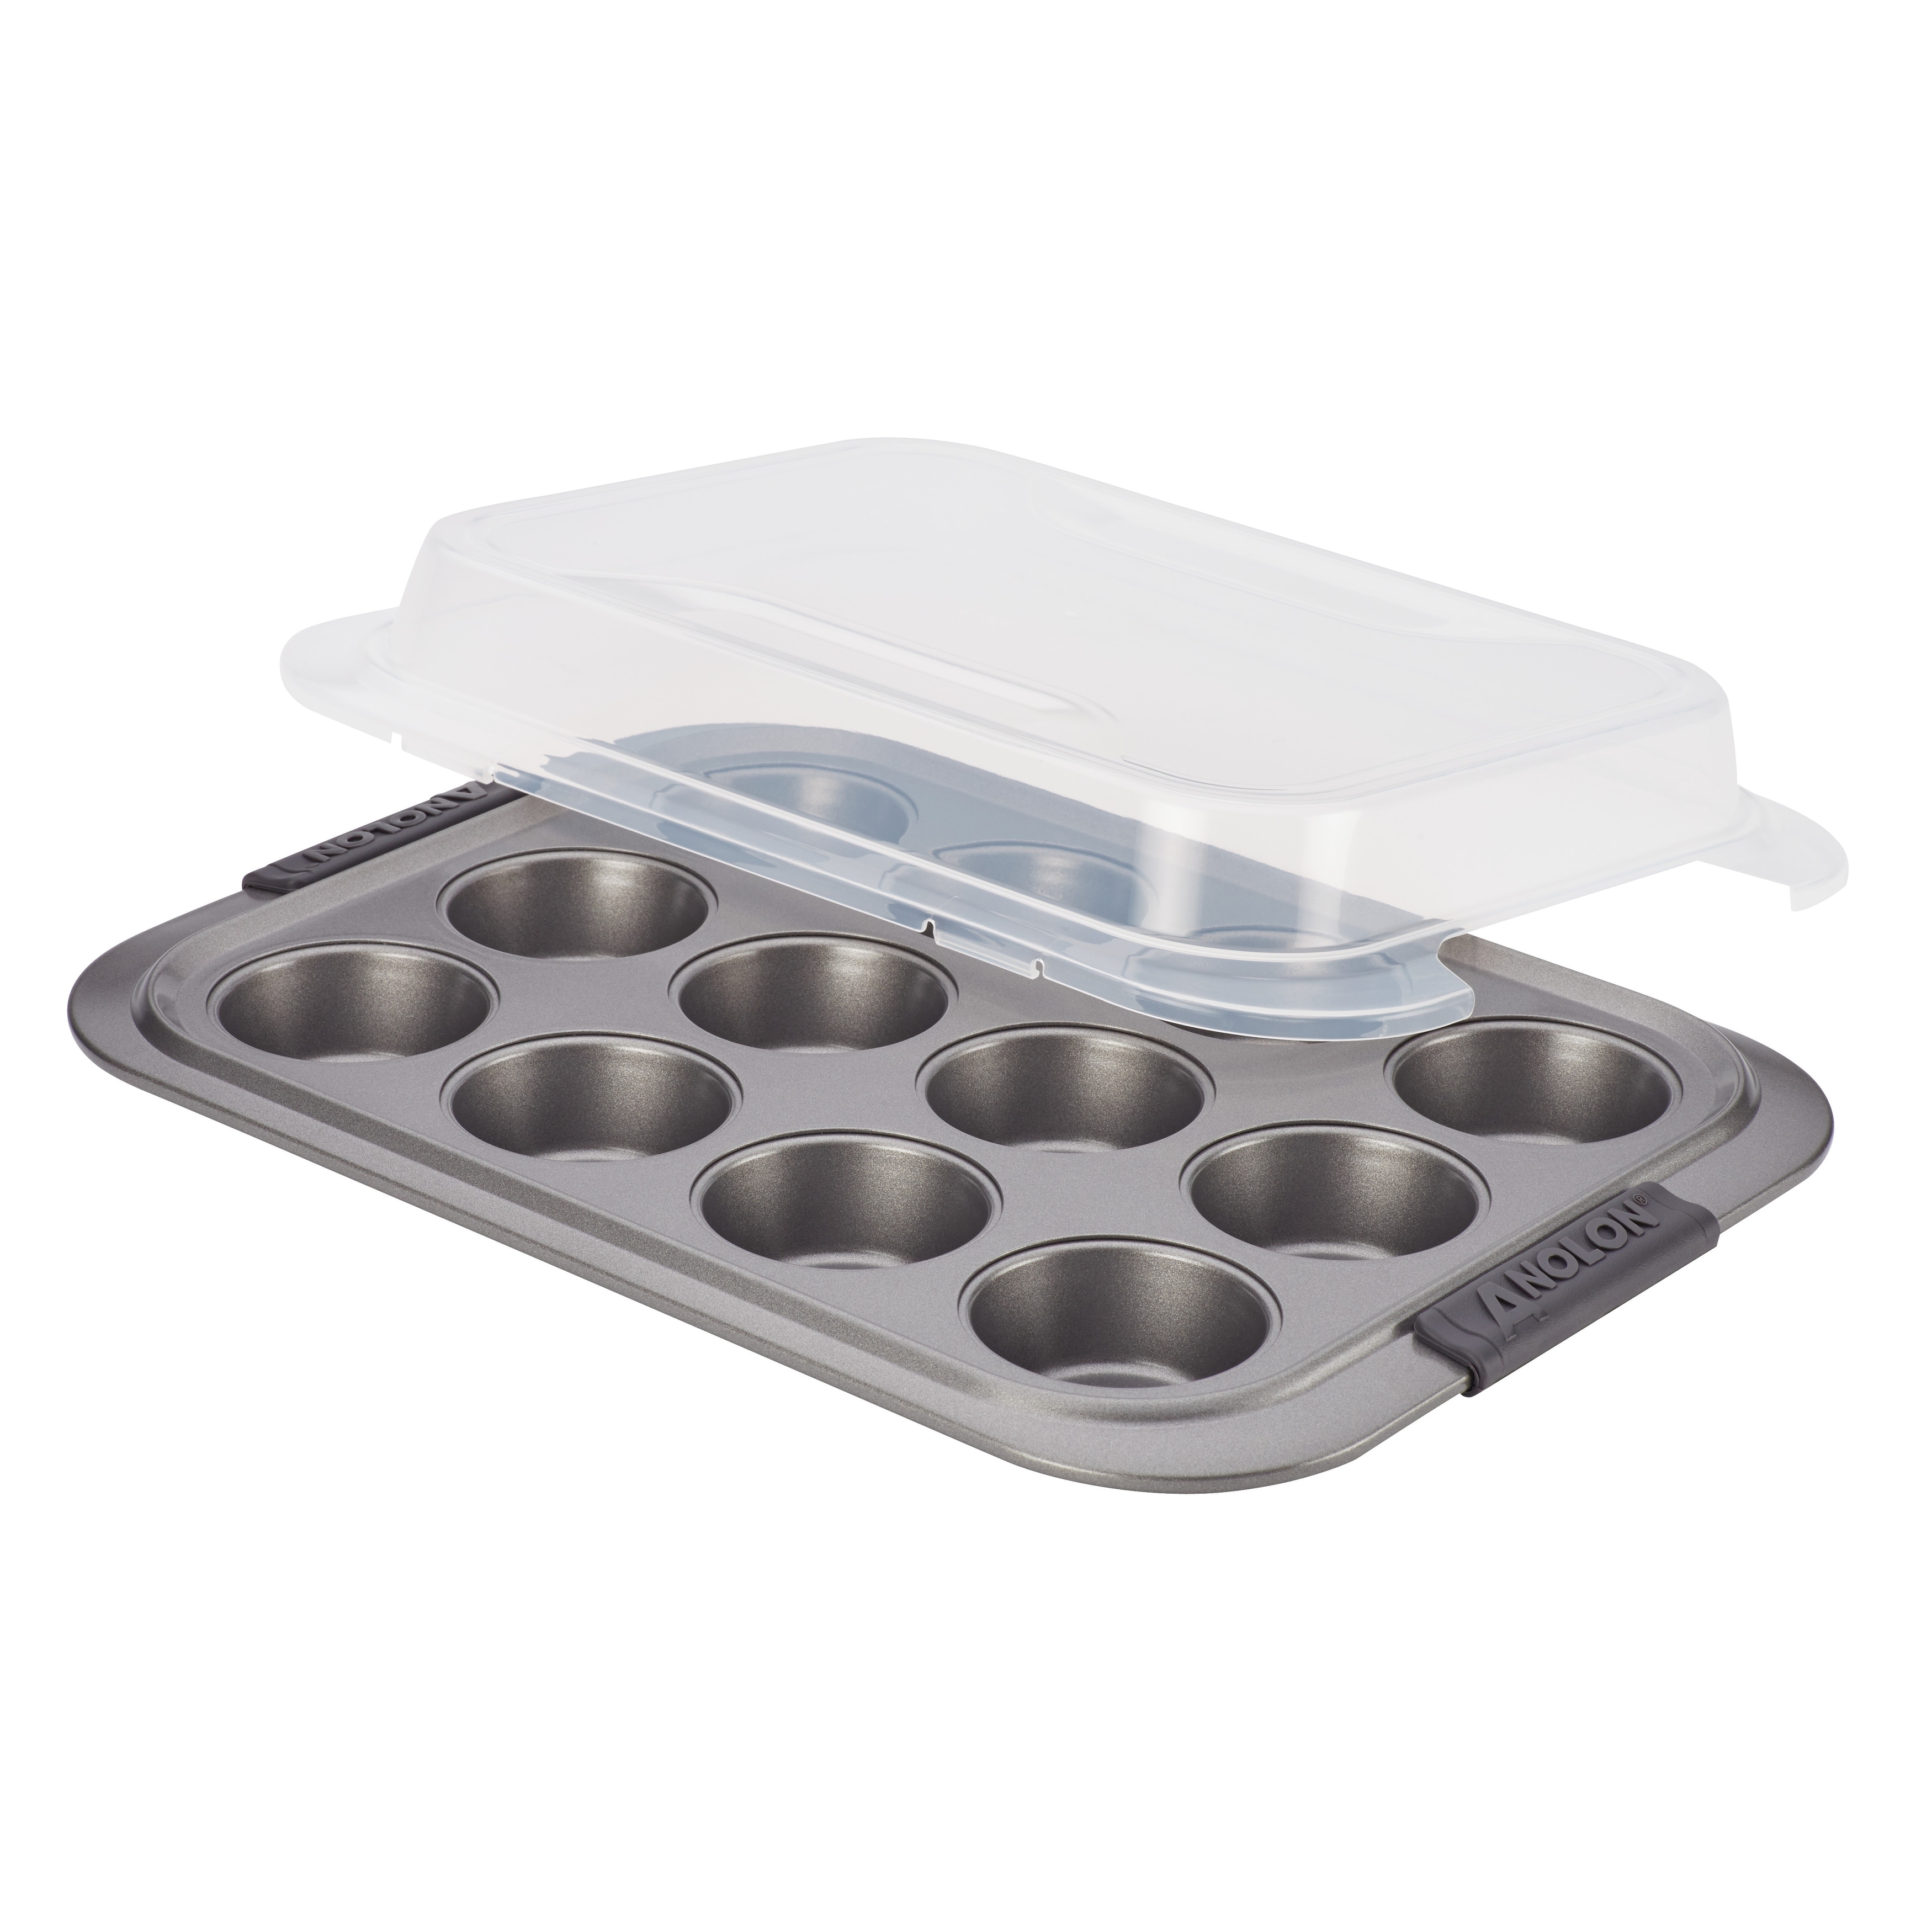 https://ak1.ostkcdn.com/images/products/is/images/direct/5e9c27cbef2ee0e27f98bbc802bb5a46a14441bb/Anolon-Advanced-Bakeware-12-Cup-Nonstick-Muffin-Pan-with-Silicone-Grips%2C-Bronze.jpg